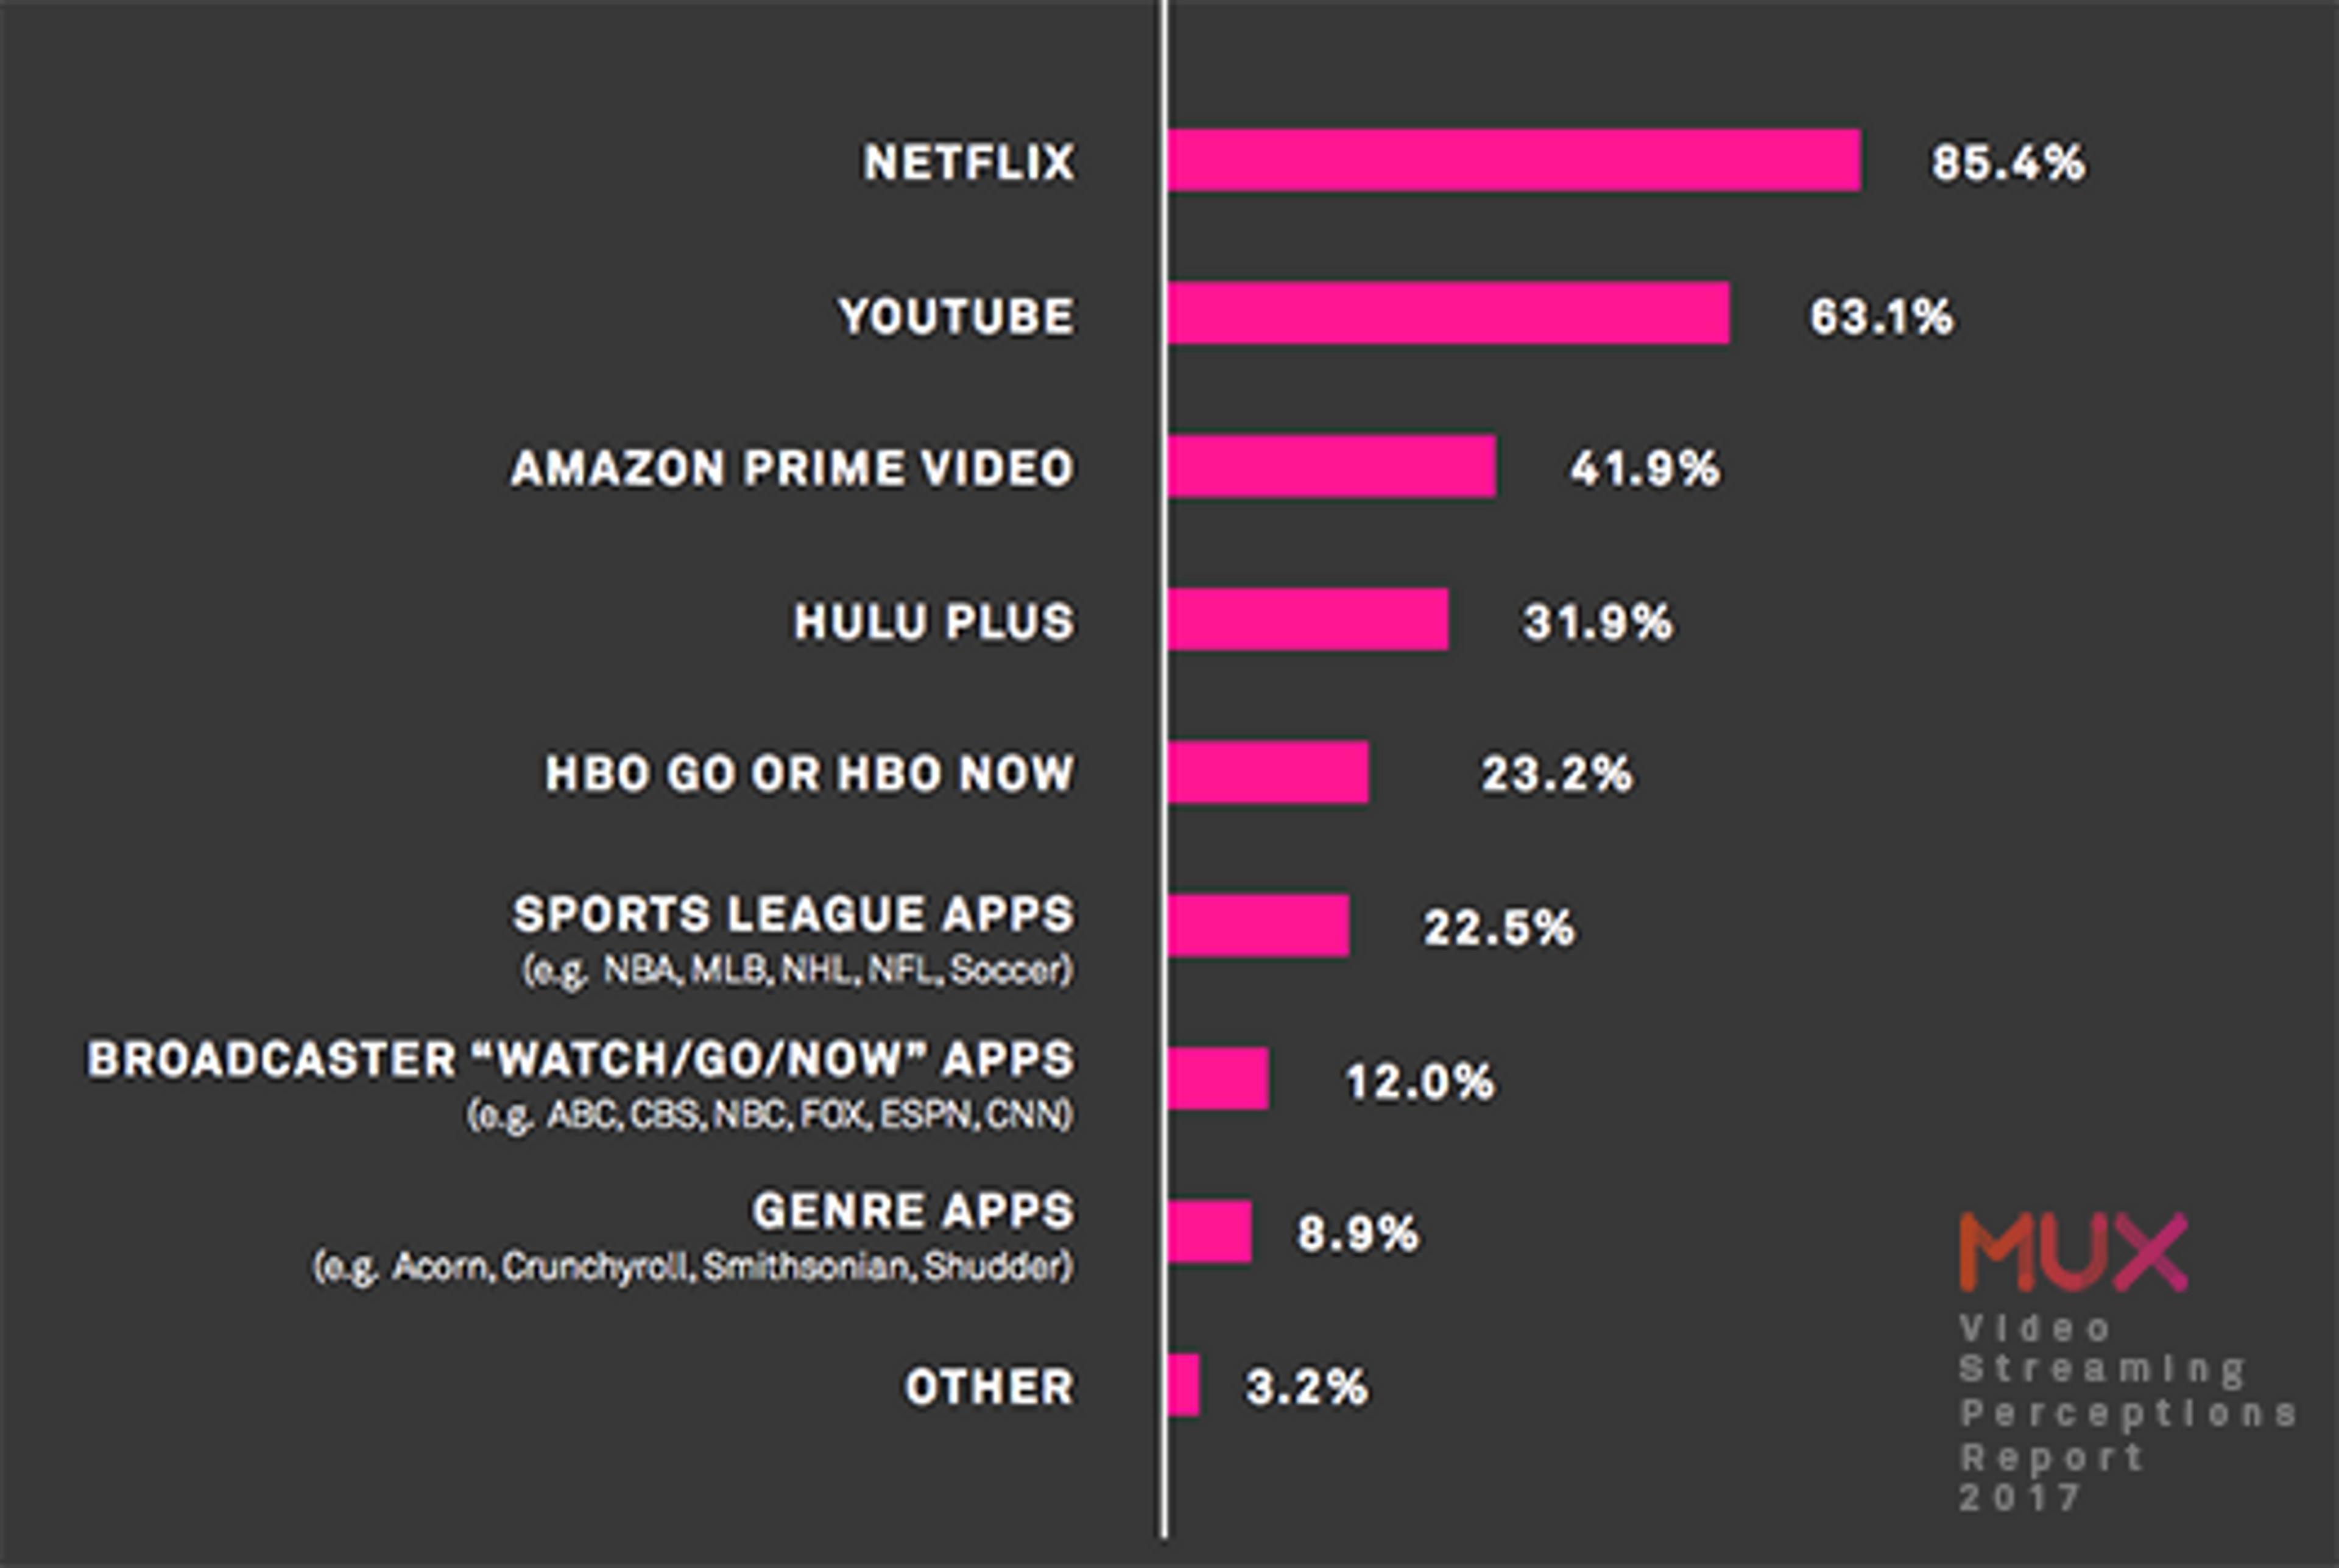 Mux Video Streaming Perceptions Report 2017 Most Used Streaming Services